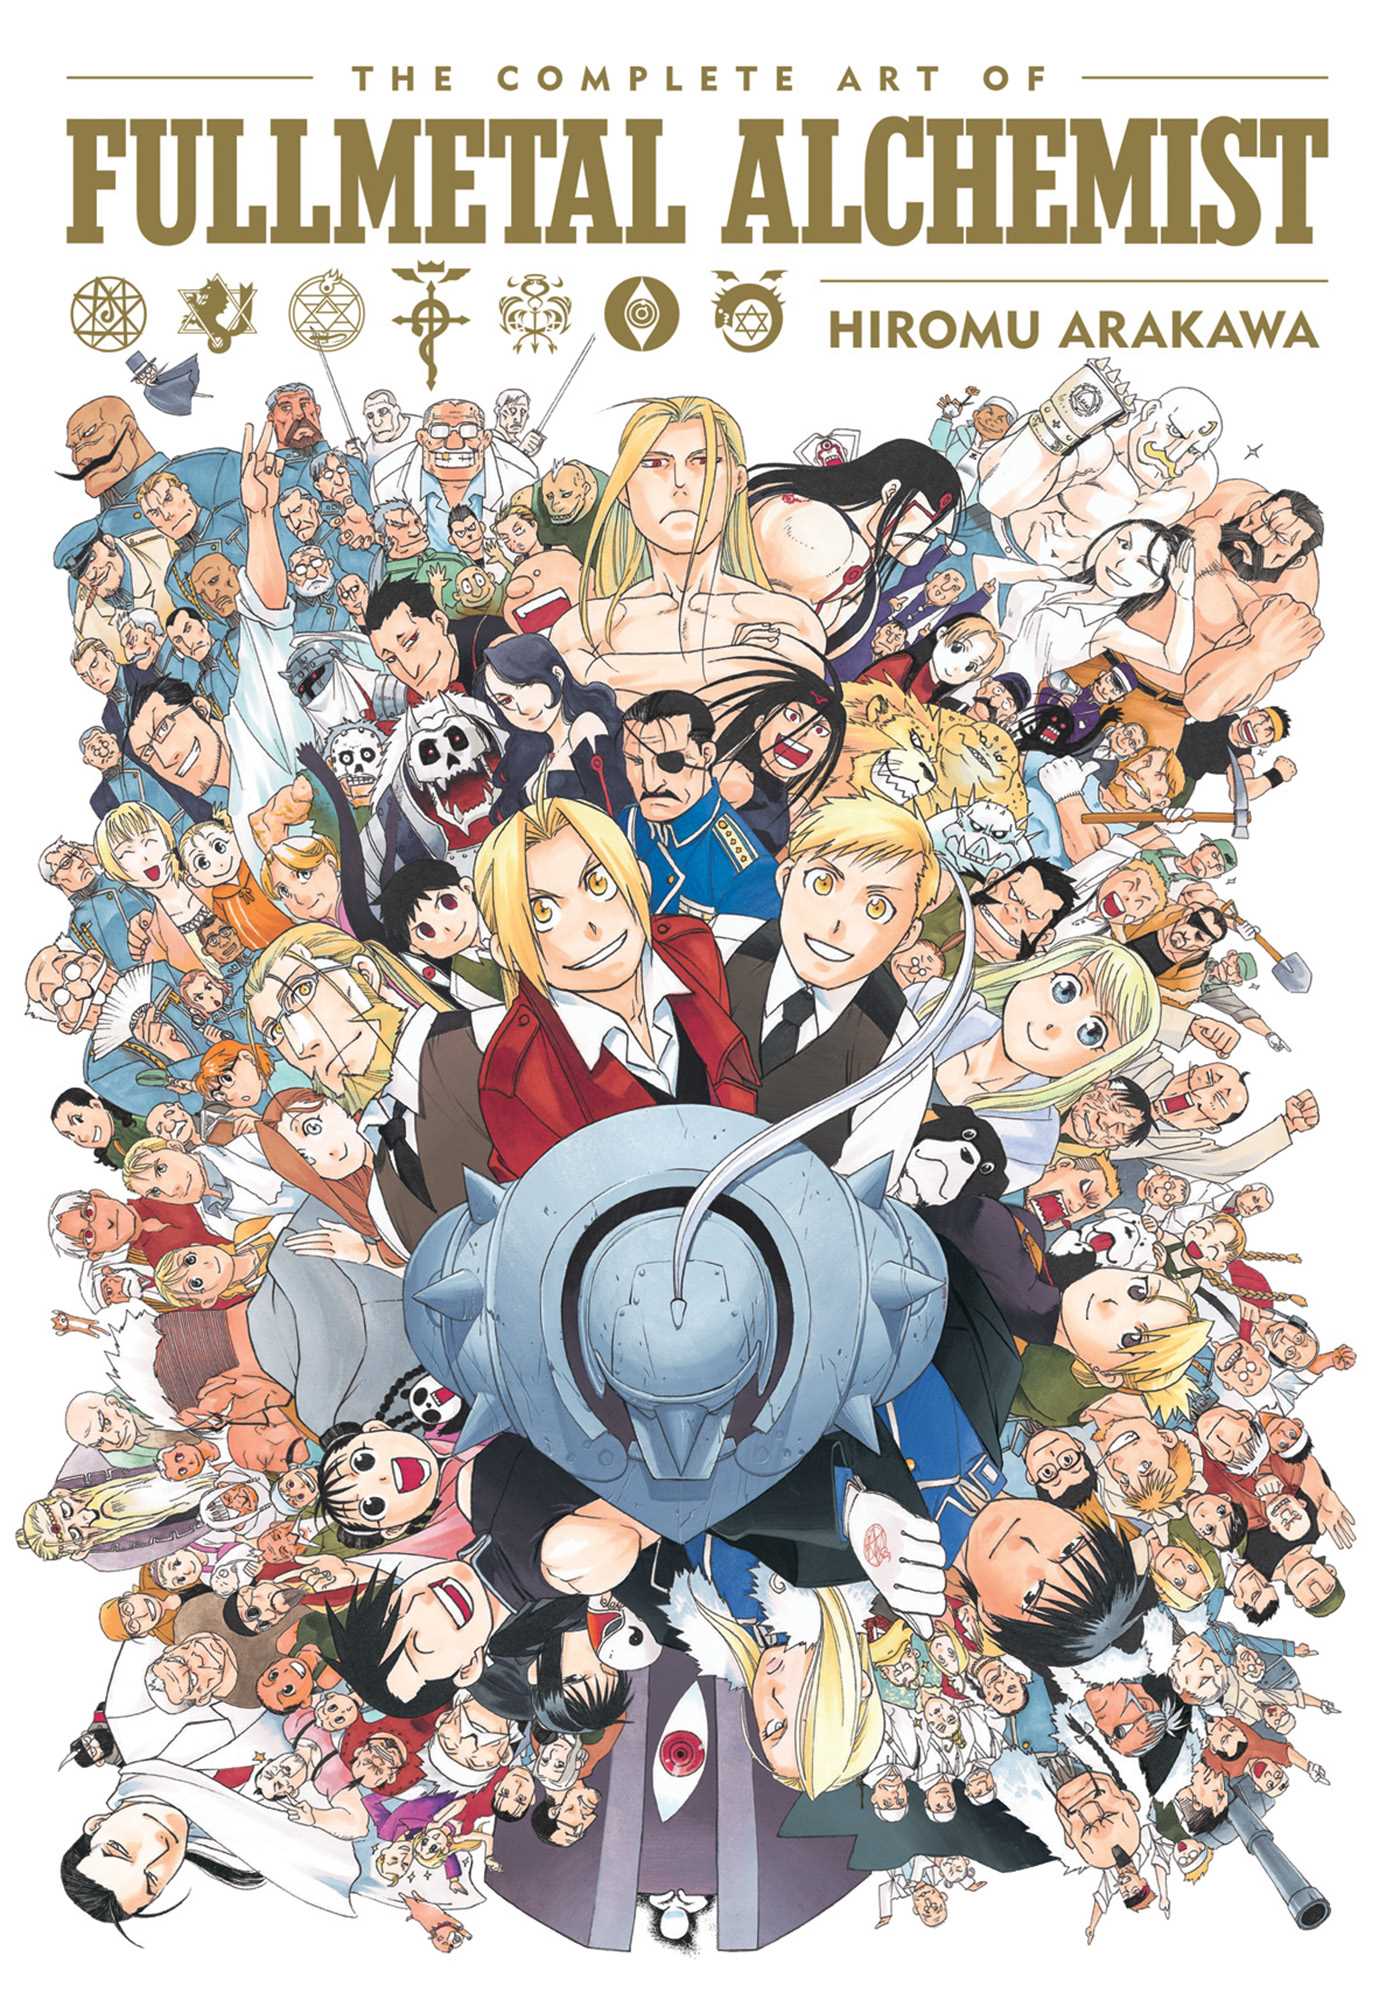 The Complete Art of Fullmetal Alchemist Review